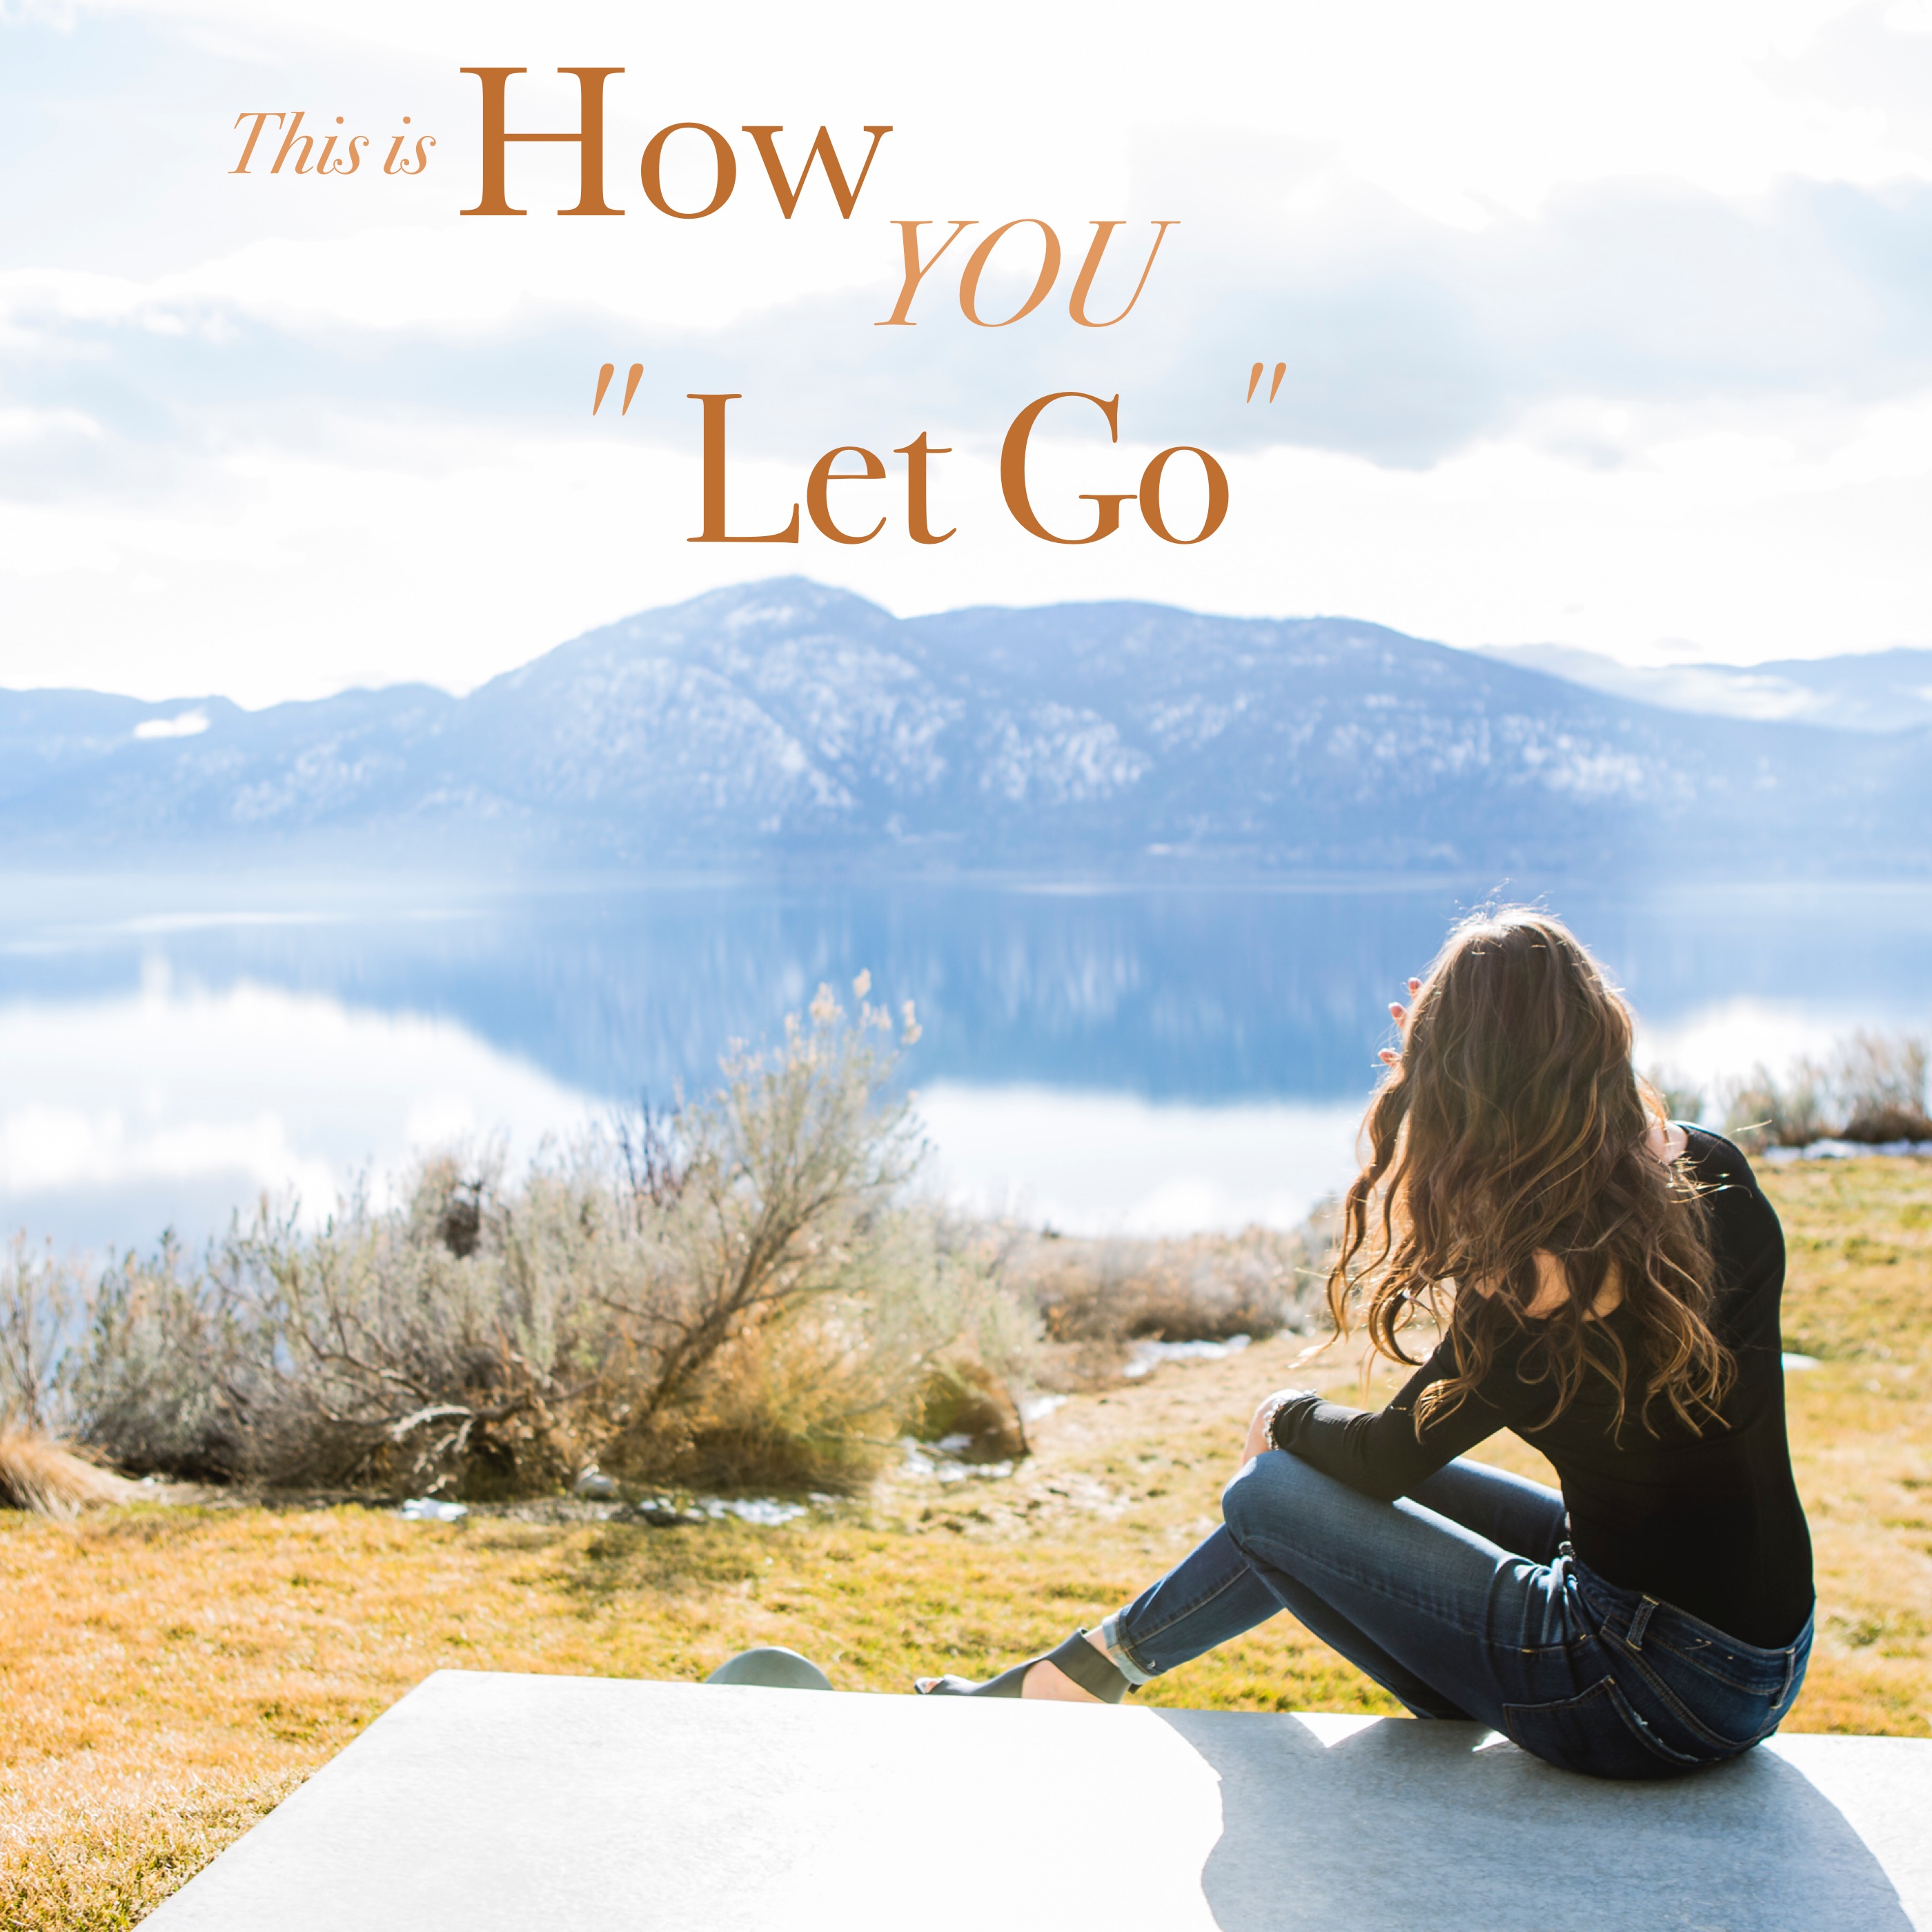 This is How You Let Go